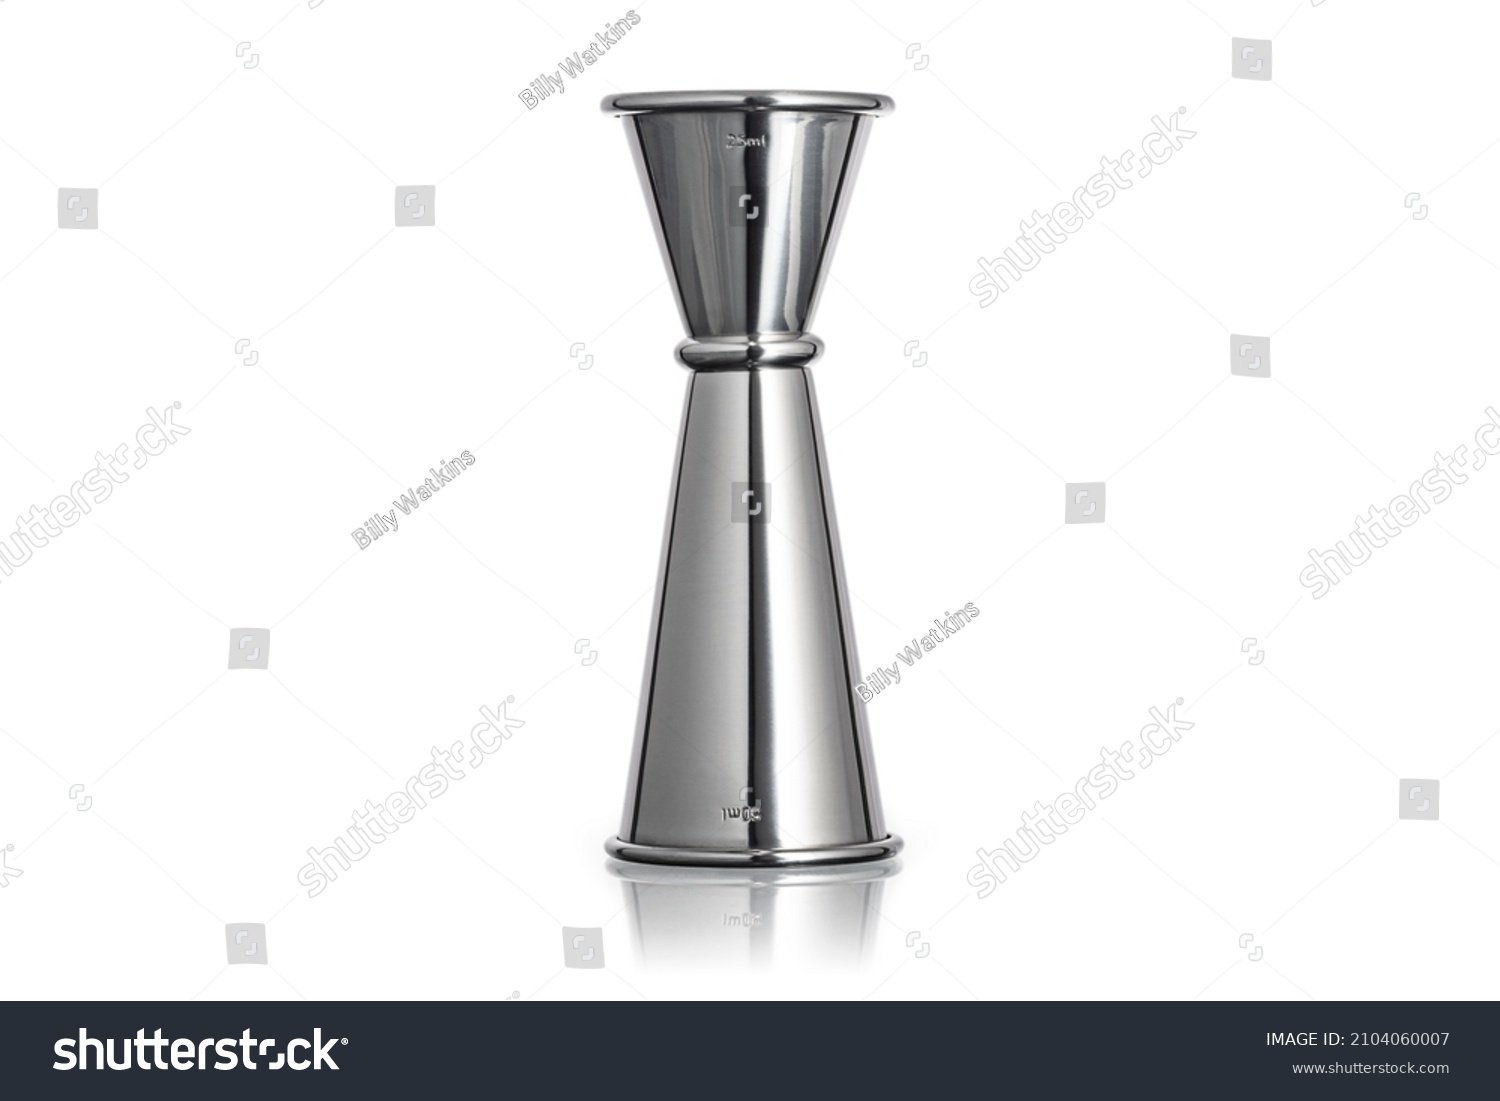 COCKTAIL JIGGER DUAL SPIRIT MEASURE CUP Cocktail Shot Measure Stainless Steel 25ml 50ml Measuring Cup for Bar Home Bartender Party Cocktails Wine Drink. Double Jigger Dual Spirit Clipping Path in JPEG #2104060007